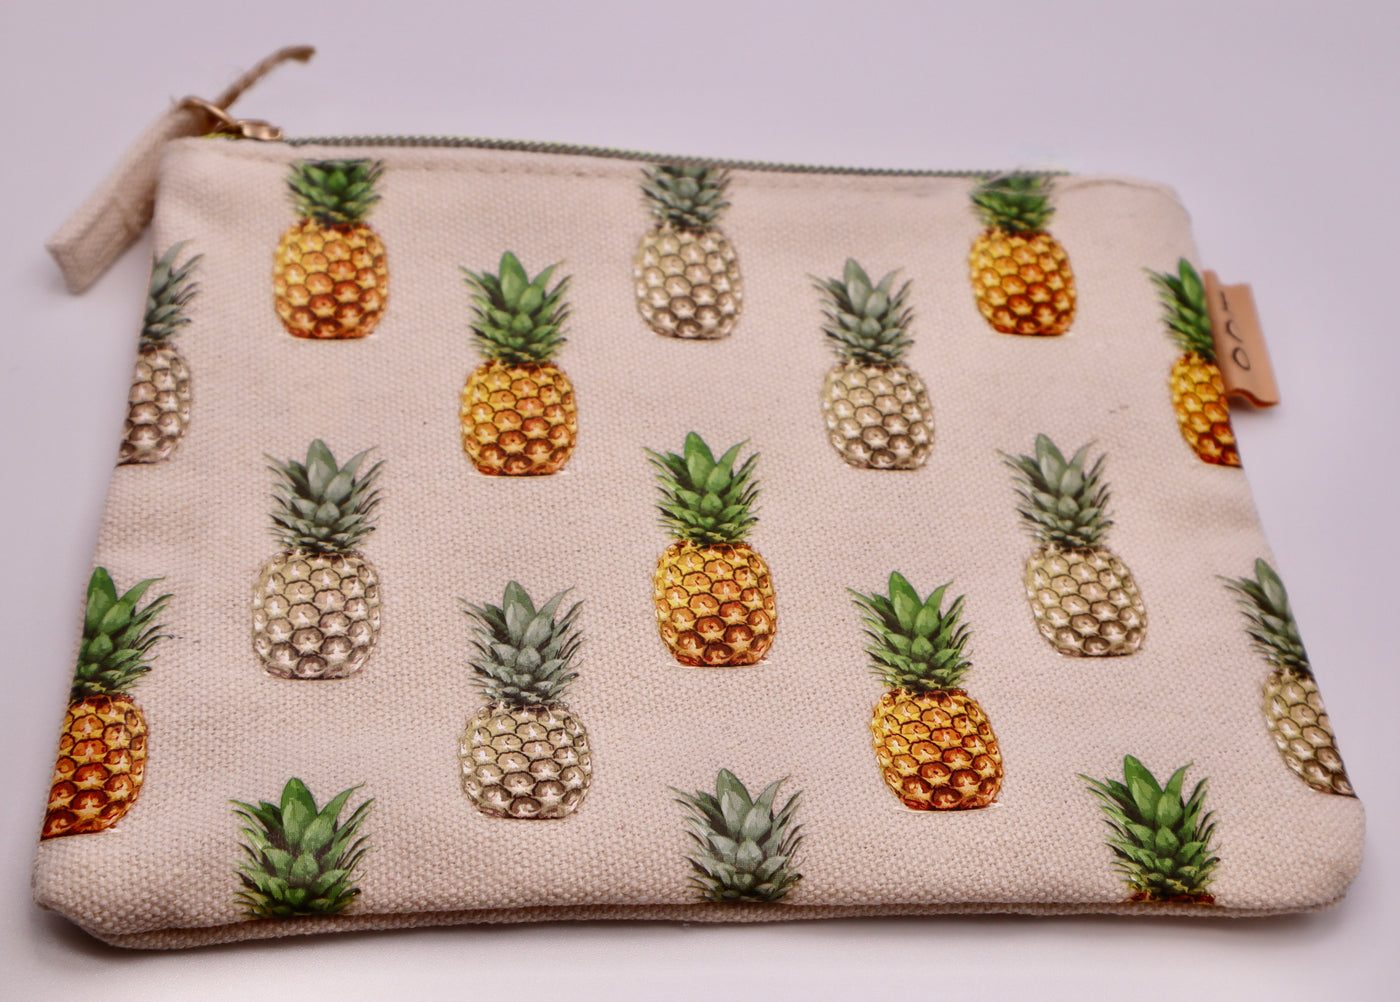 Pineapple makeup pouch. Cosmetic bag.